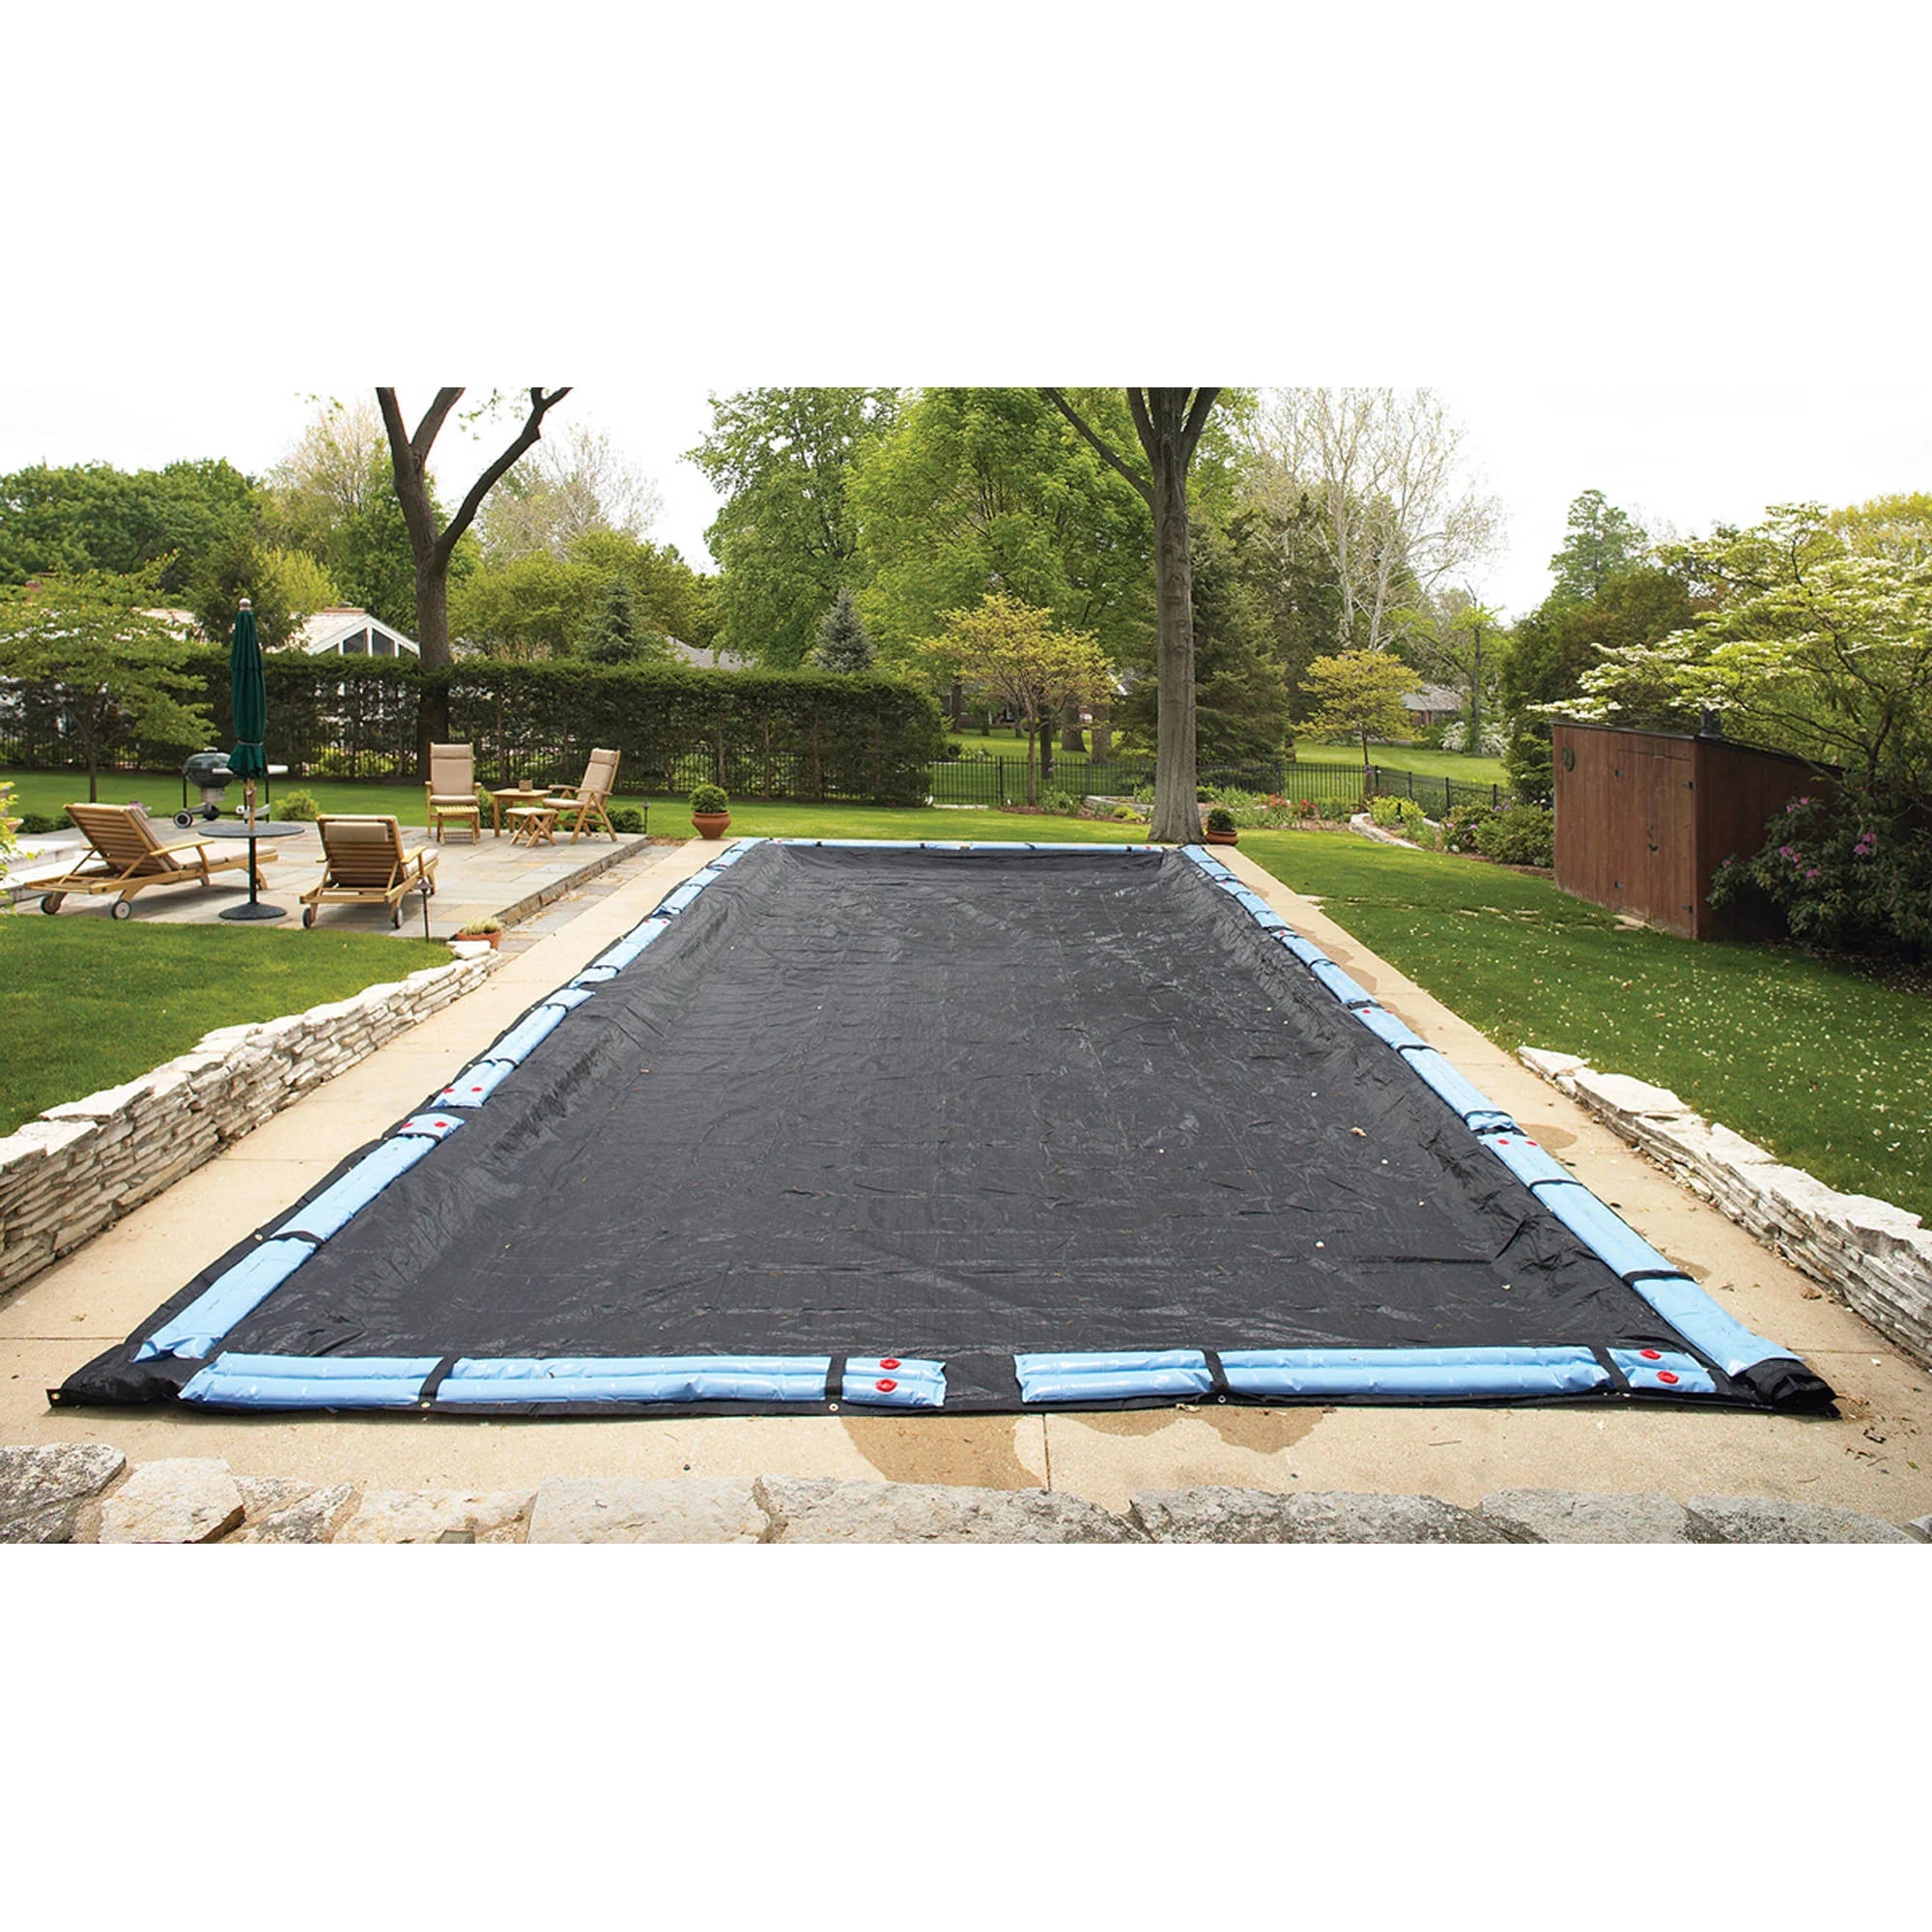 Rugged Mesh 25' x 45' Rectangle In-Ground Pool Winter Cover